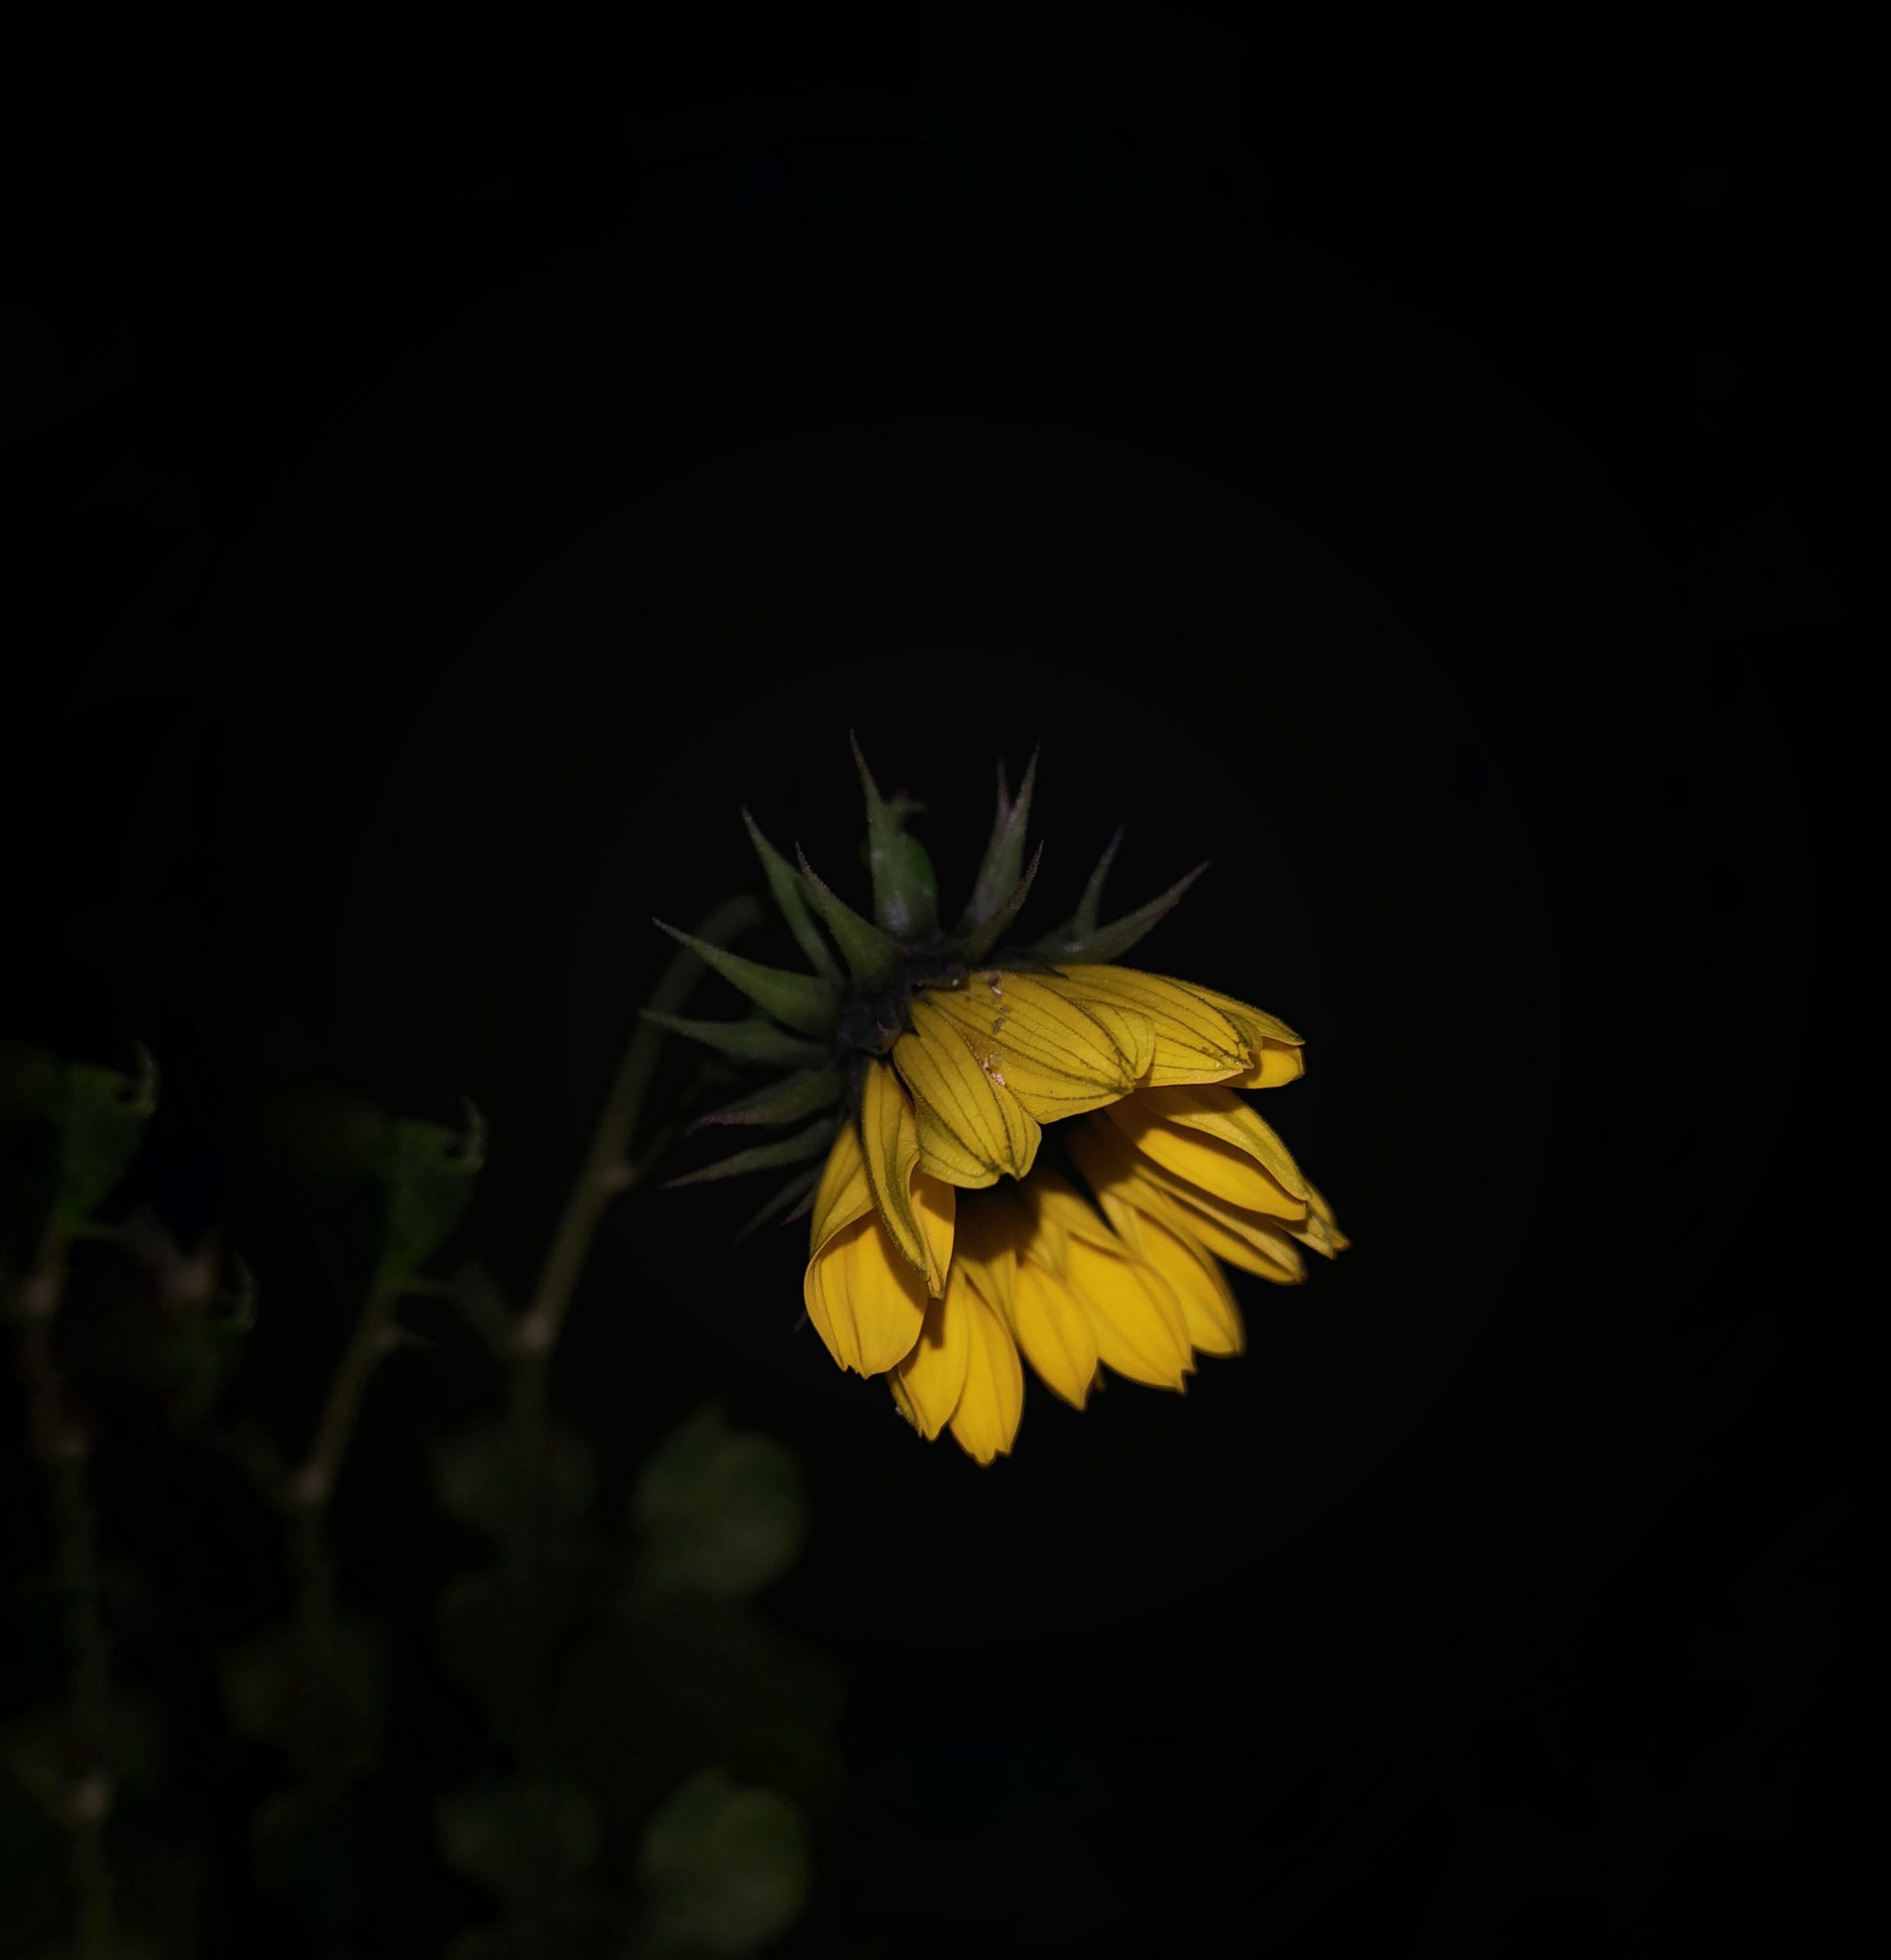 A sunflower during night